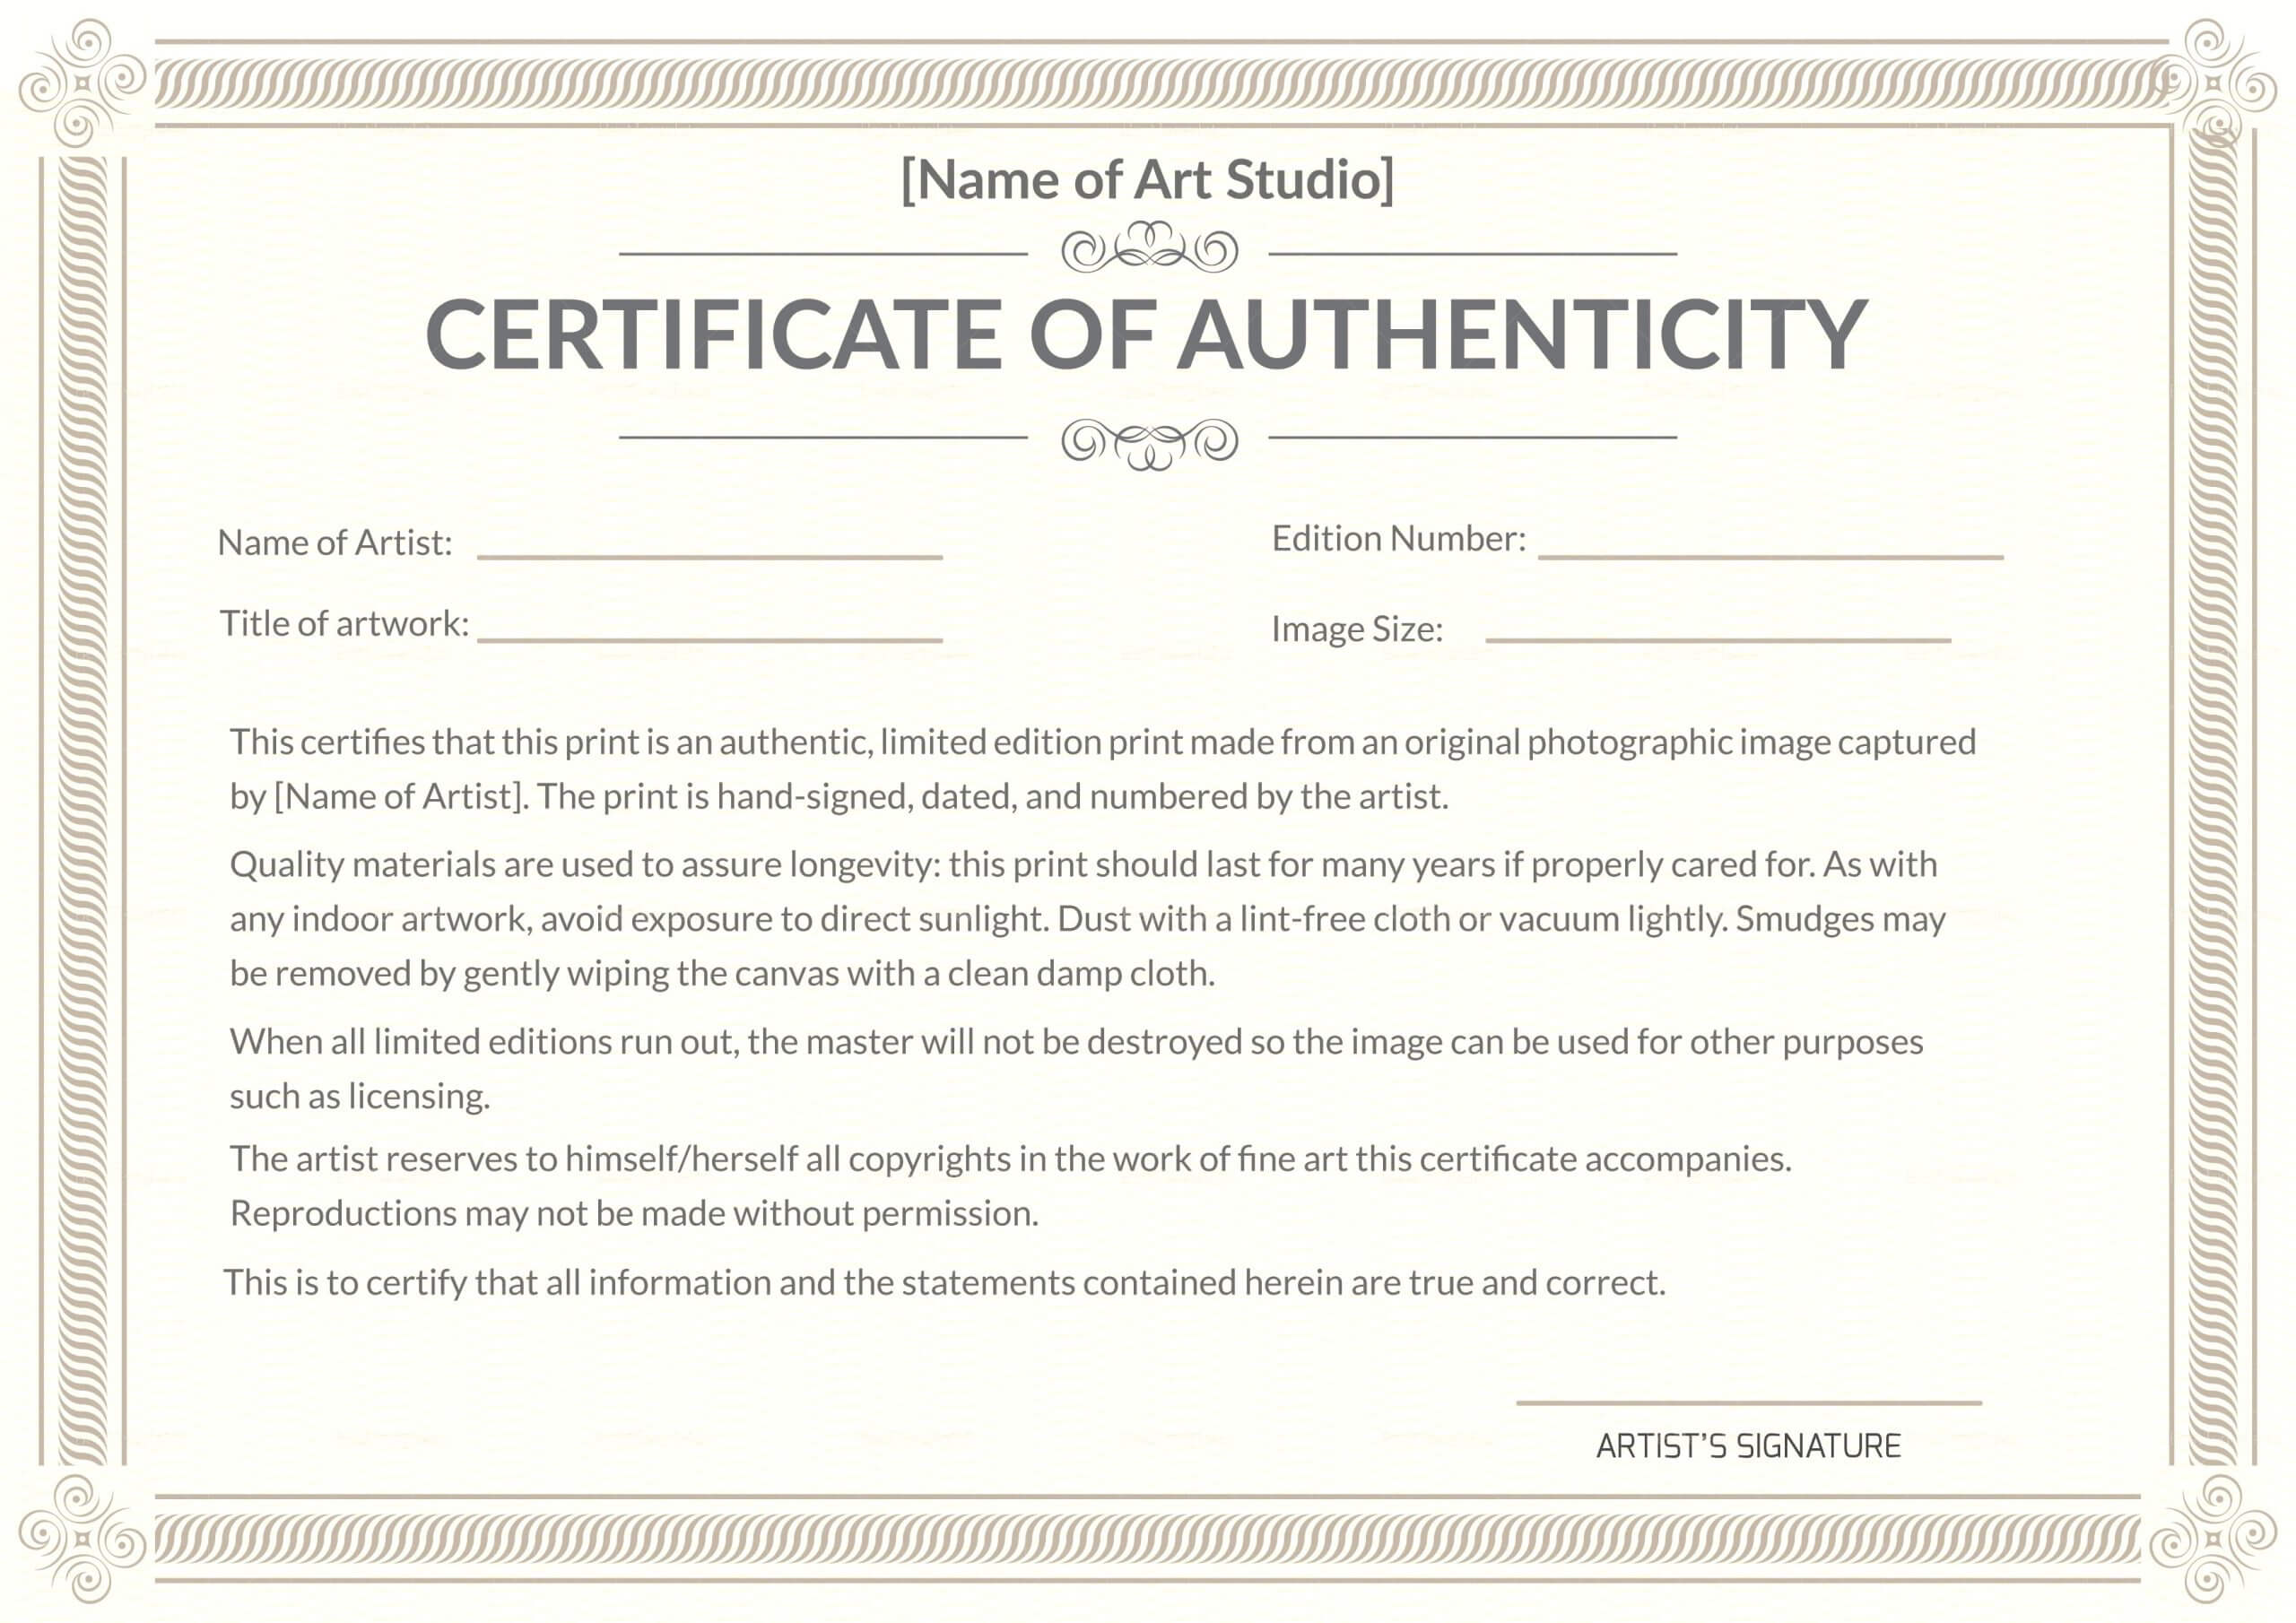 Certificate Of Authenticity Template Autograph Templates With Regard To Certificate Of Authenticity Photography Template